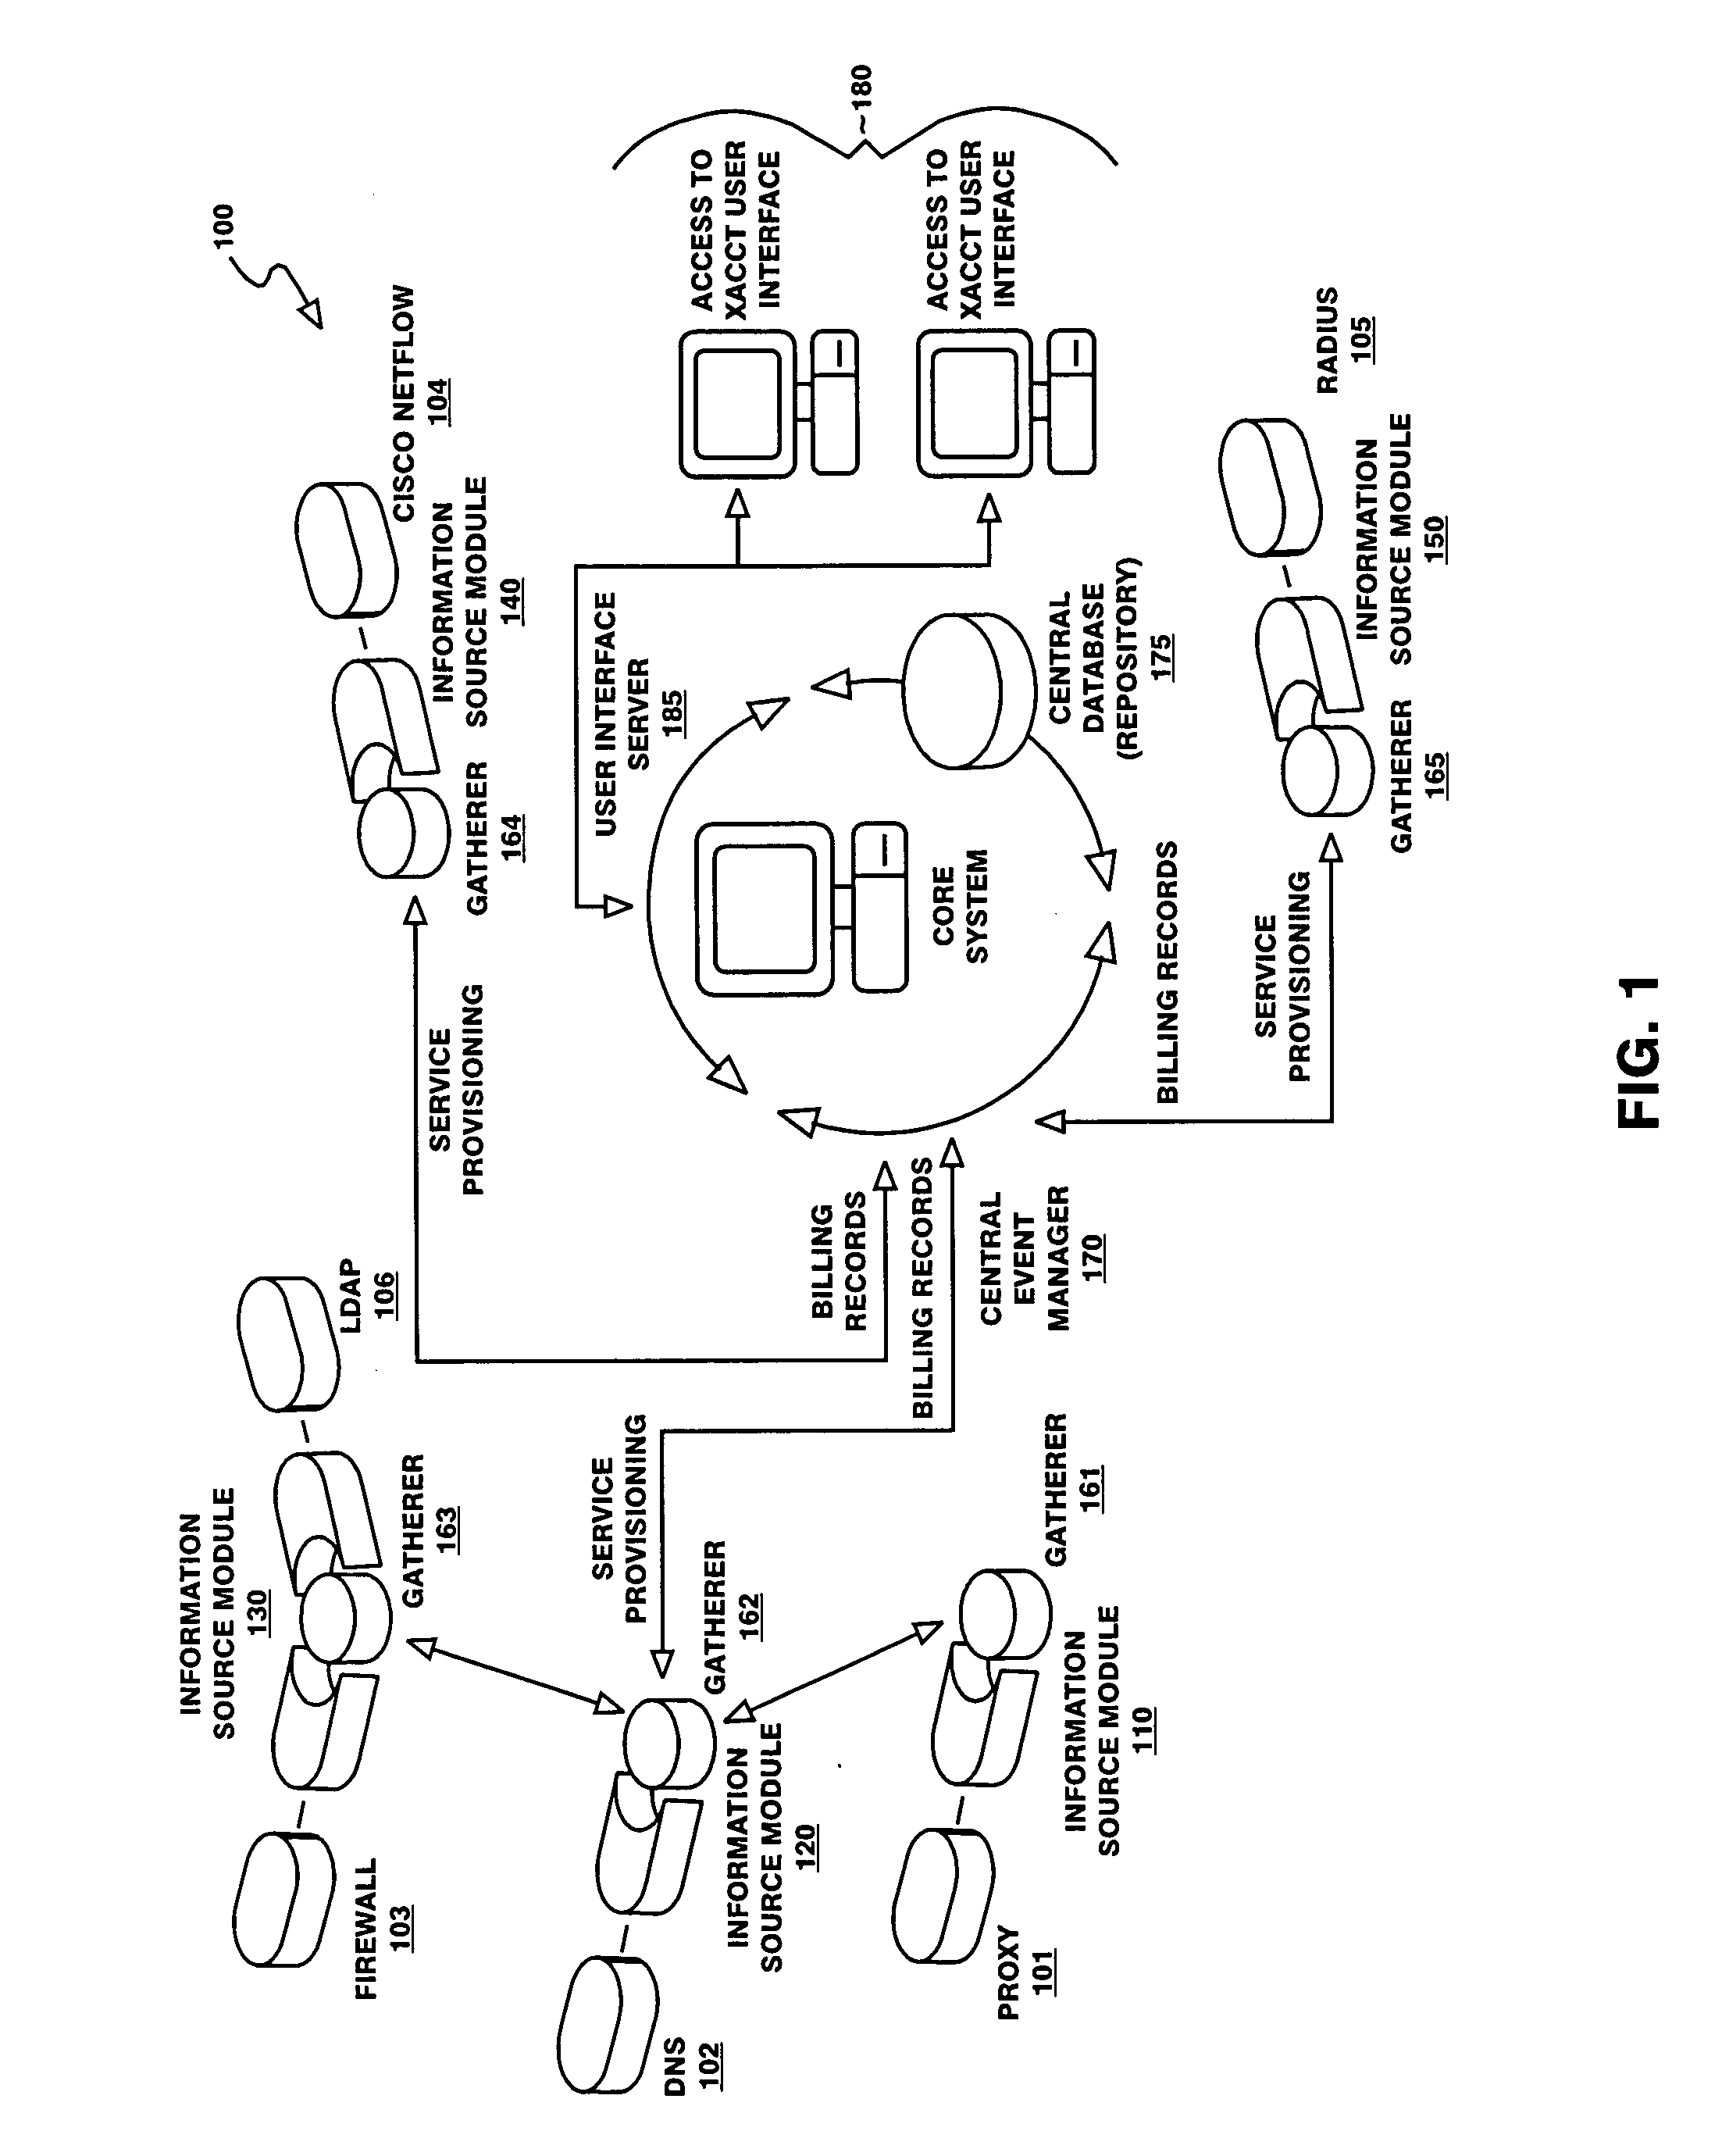 Network accounting and billing system and method